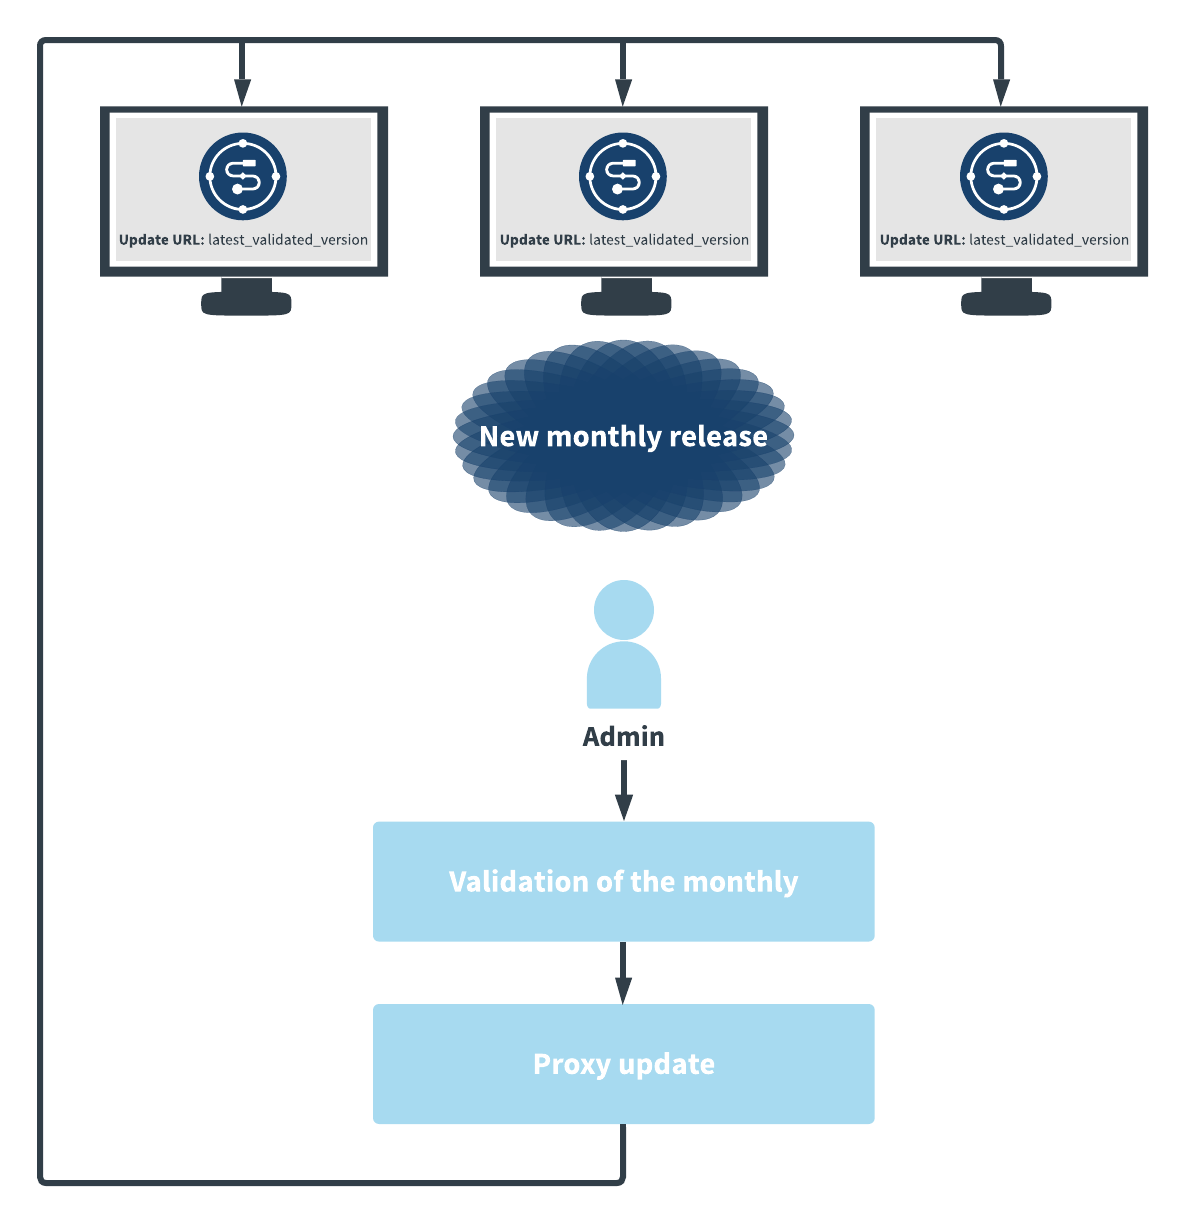 Workflow diagram of an administrator who receives a new monthly update. They start by validating the monthly, then set up the update on a proxy repository before deploying it to all Talend Studio instances used by developers.